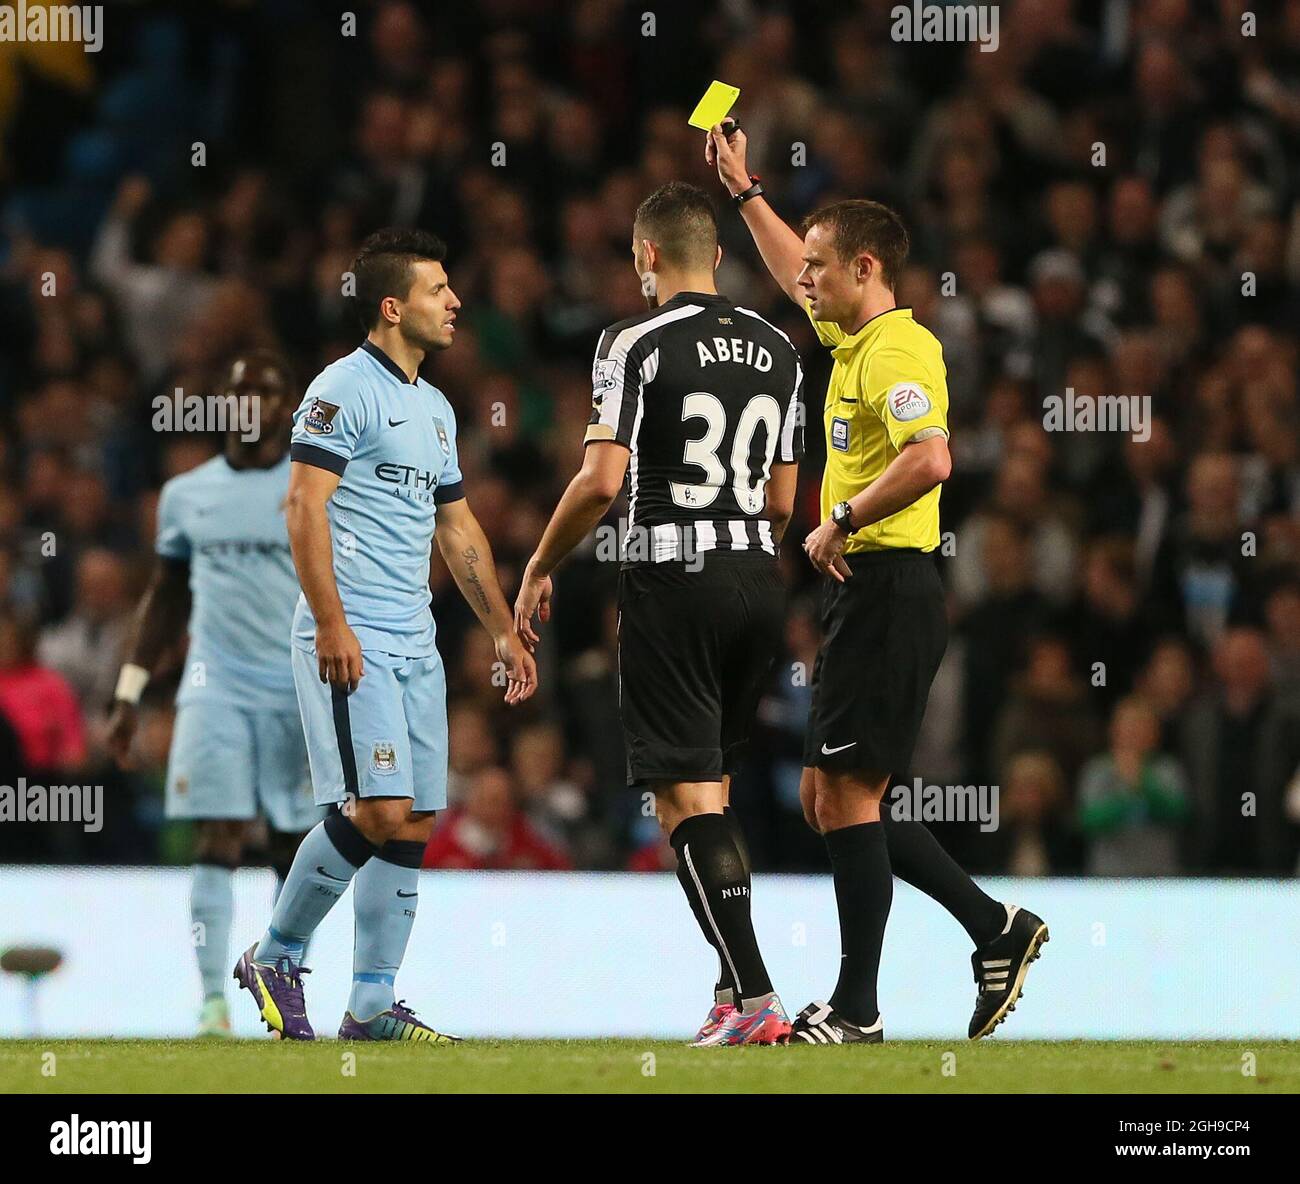 Manchester City's Sergio Aguero gets booked by referee Stuart Attwell during the Capital One Cup Fourth Round match between Manchester City and Newcastle United at the Etihad Stadium, London on 29, October 2014. Stock Photo